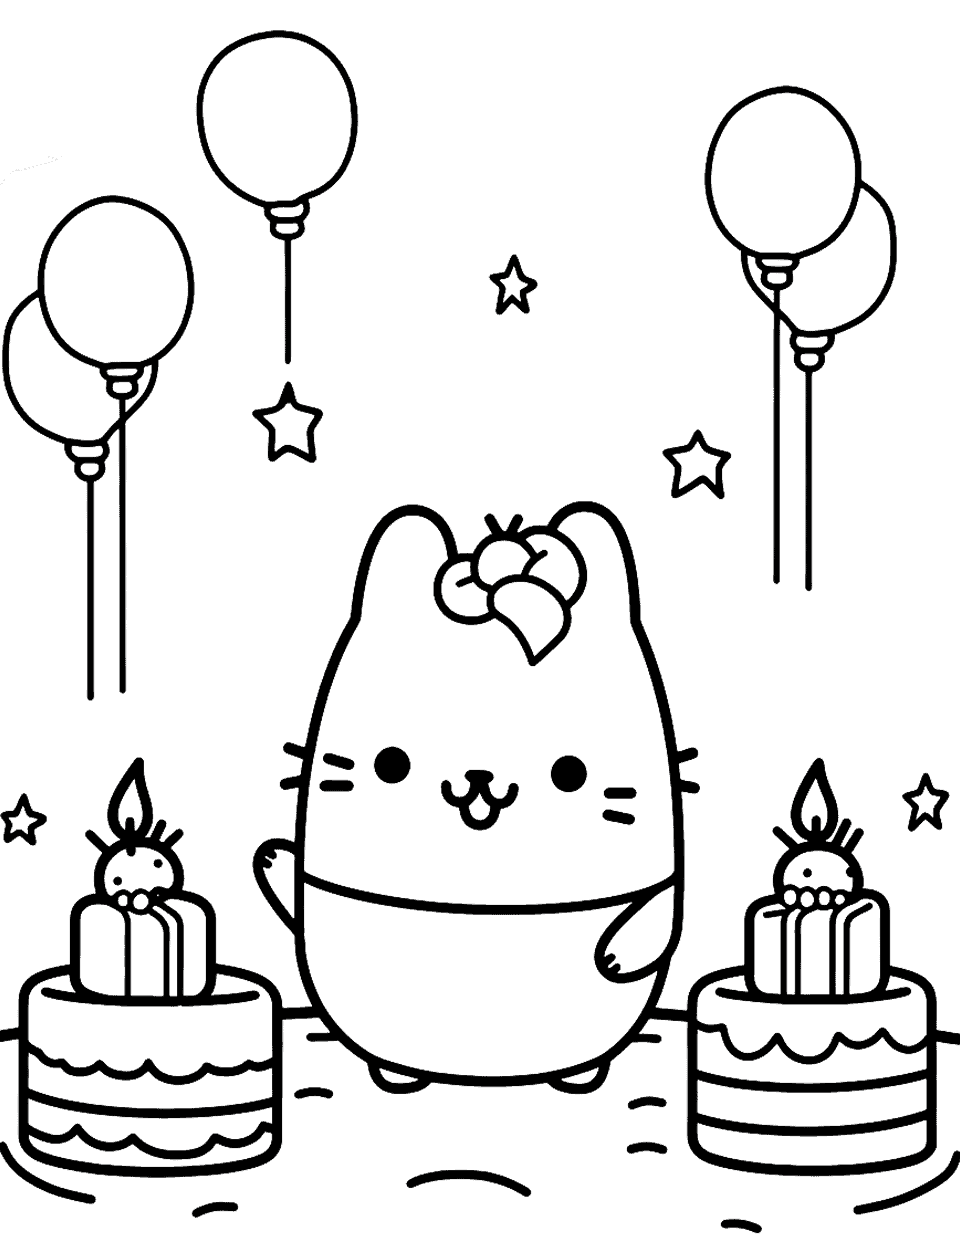 Pusheen's Birthday Bash Kawaii Coloring Page - Pusheen having a fun-filled birthday party with balloons and 2 birthday cakes.